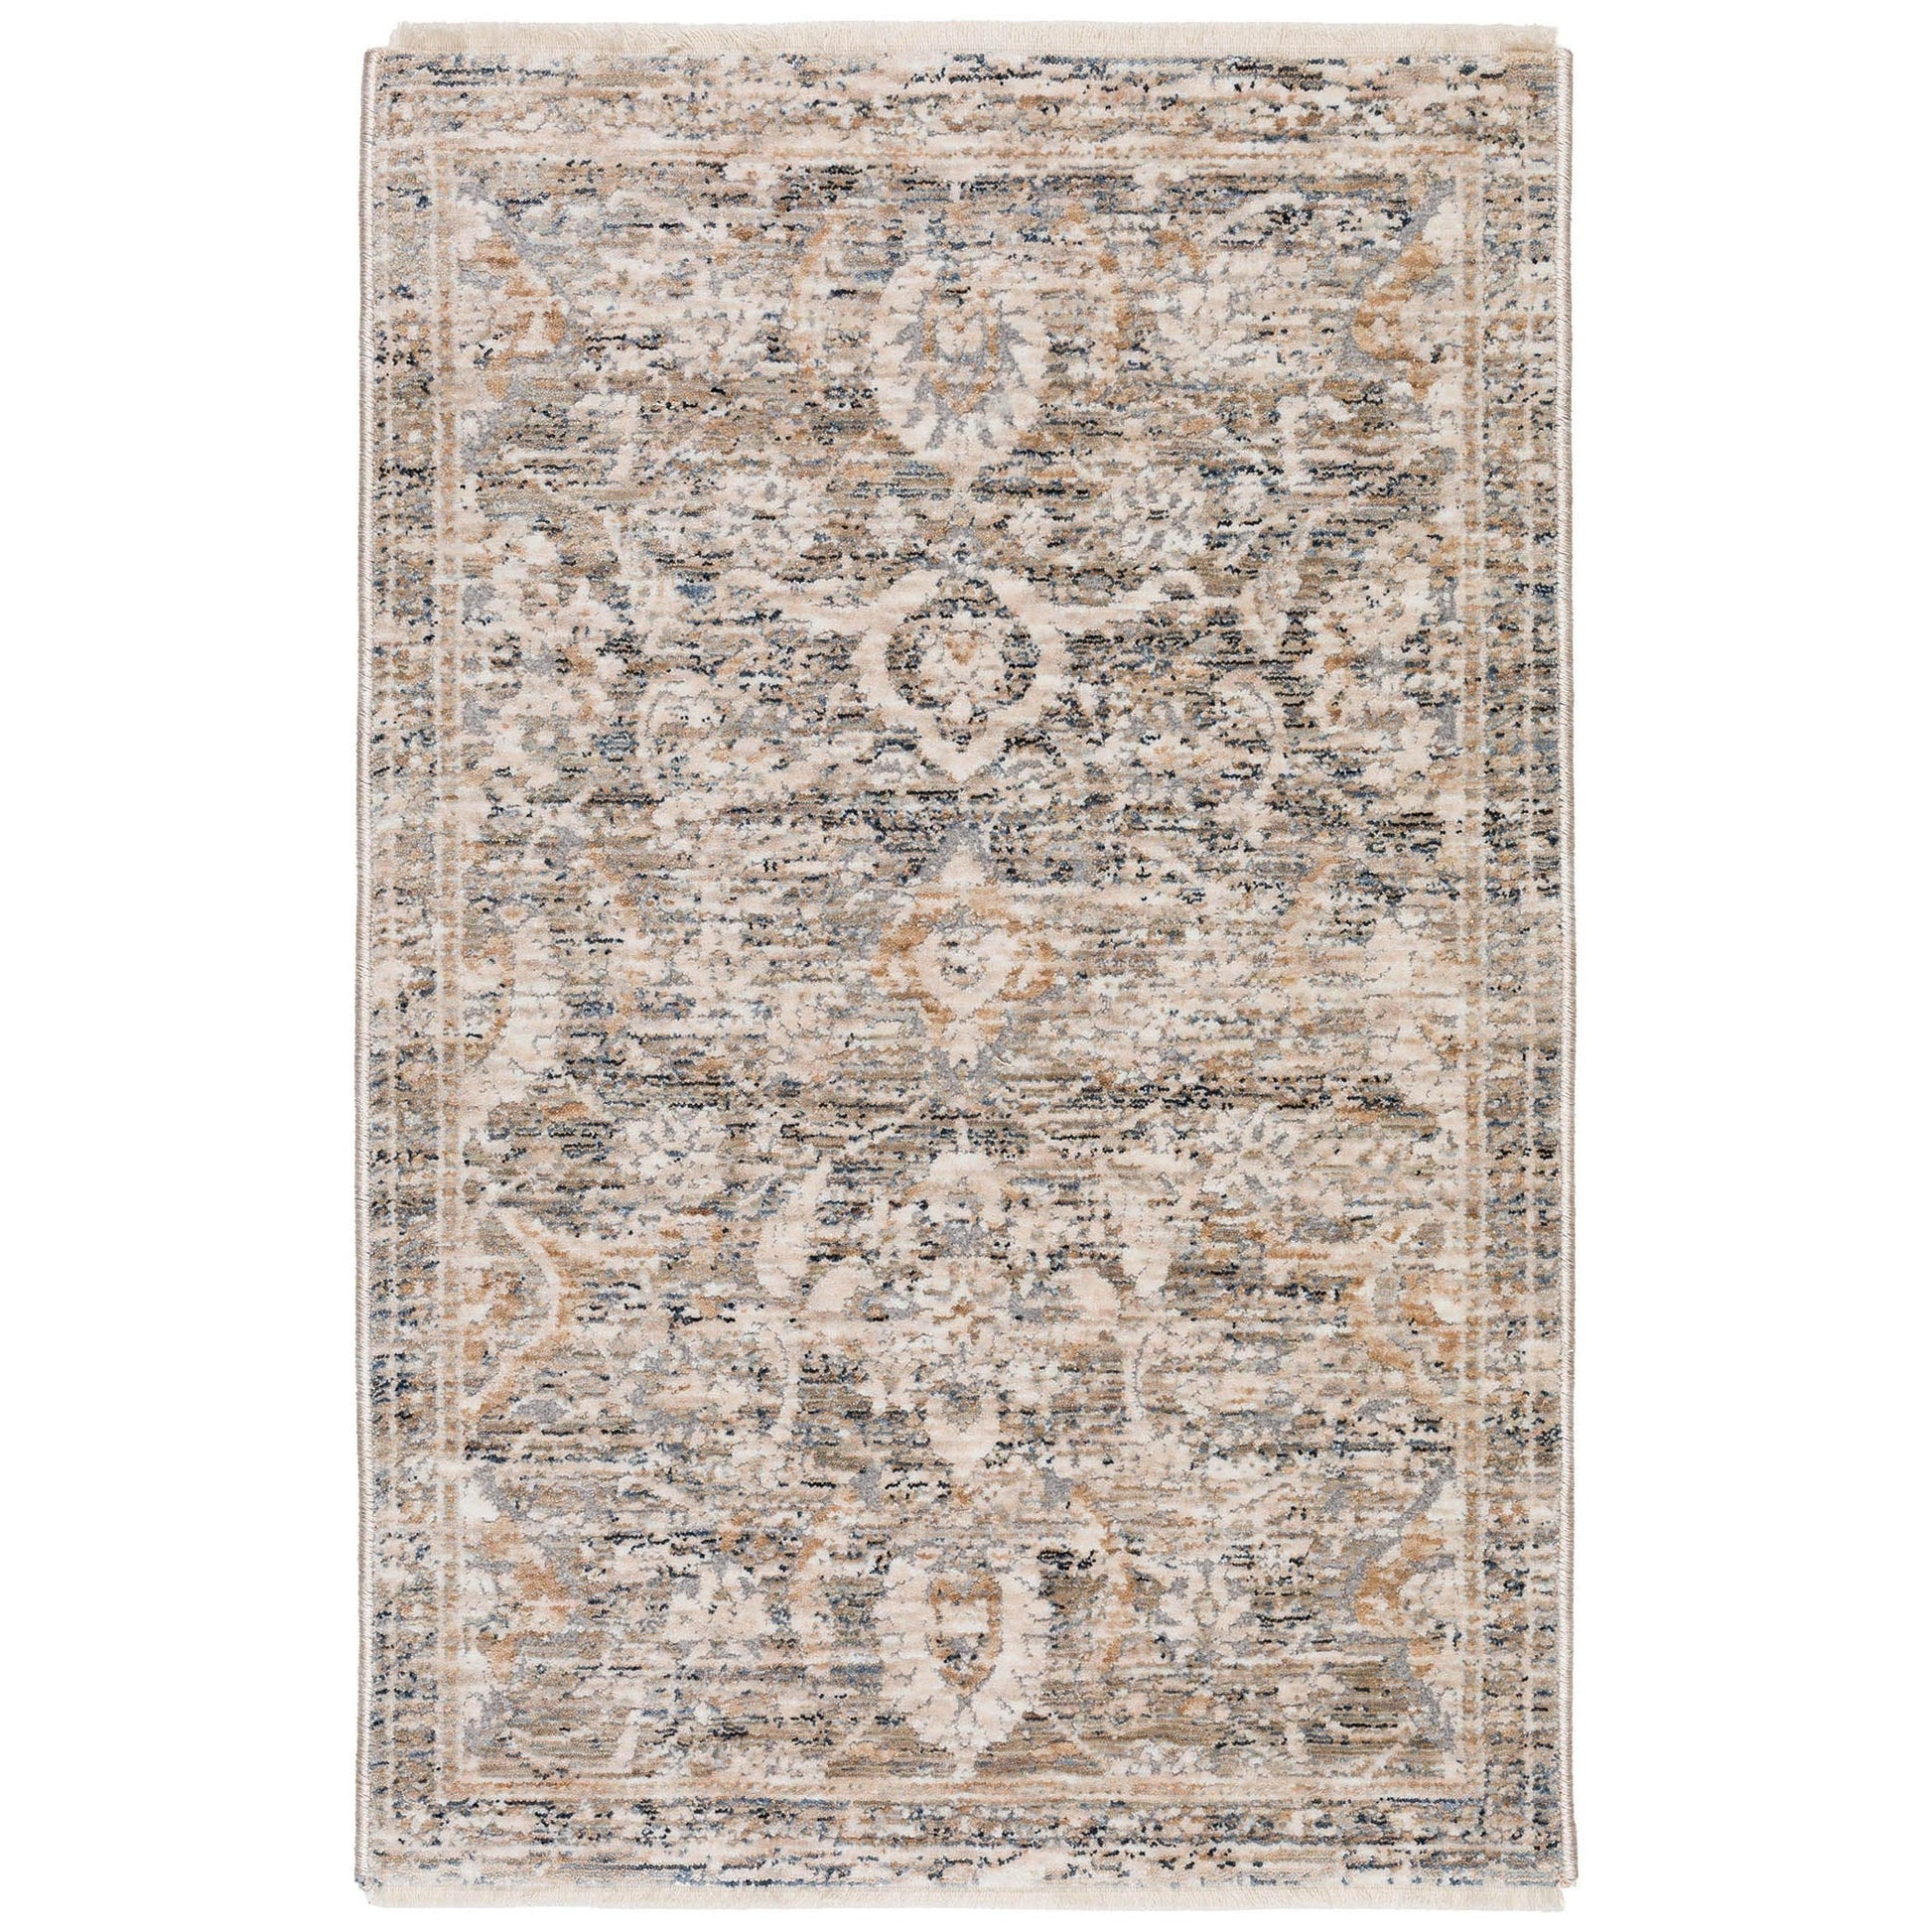 Dalyn Rugs Regal RG1 Putty Traditional Power Woven Rug